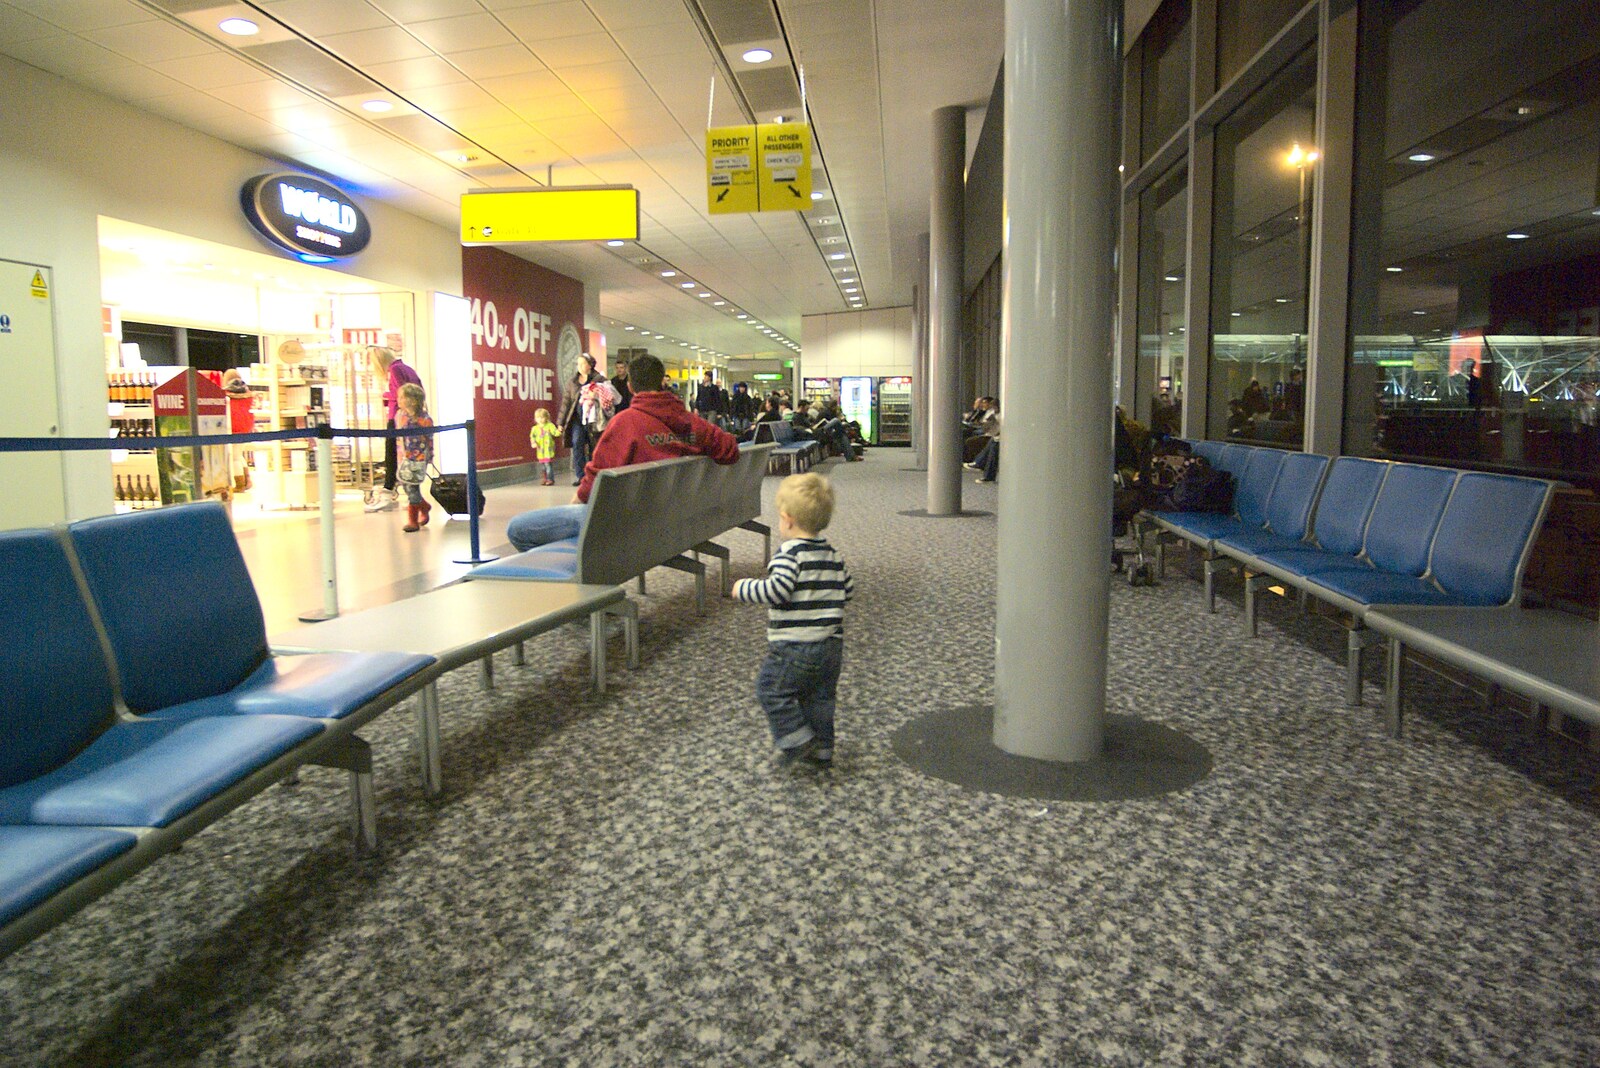 At Stansted airport, The Boy roams around near Gate 40 from A Day in Greystones, County Dublin, Ireland - 28th February 2010